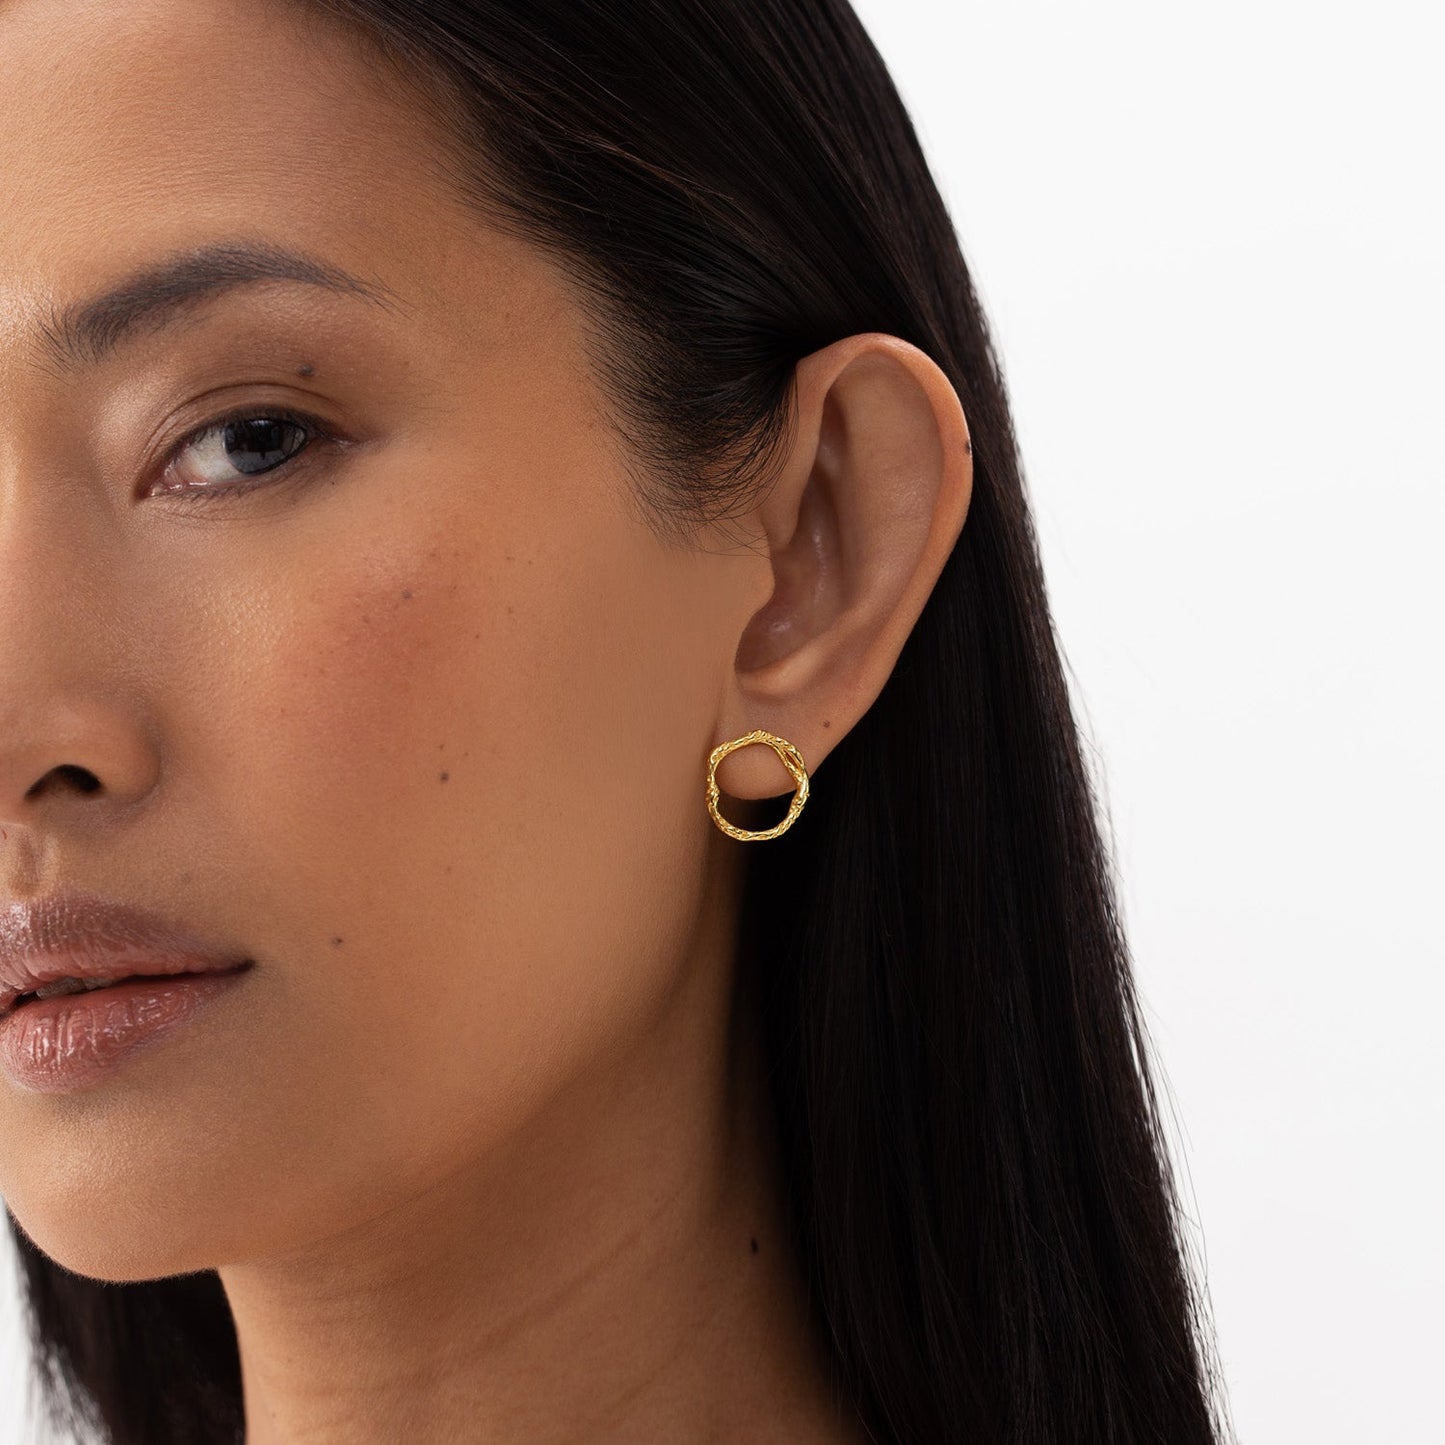 Stud Earrings ECHO - Gold: Close-up of a woman wearing minimalist circle-shaped golden earrings, hypoallergenic and made from recycled silver, 18k gold plated. Size: 16 x 17 mm.